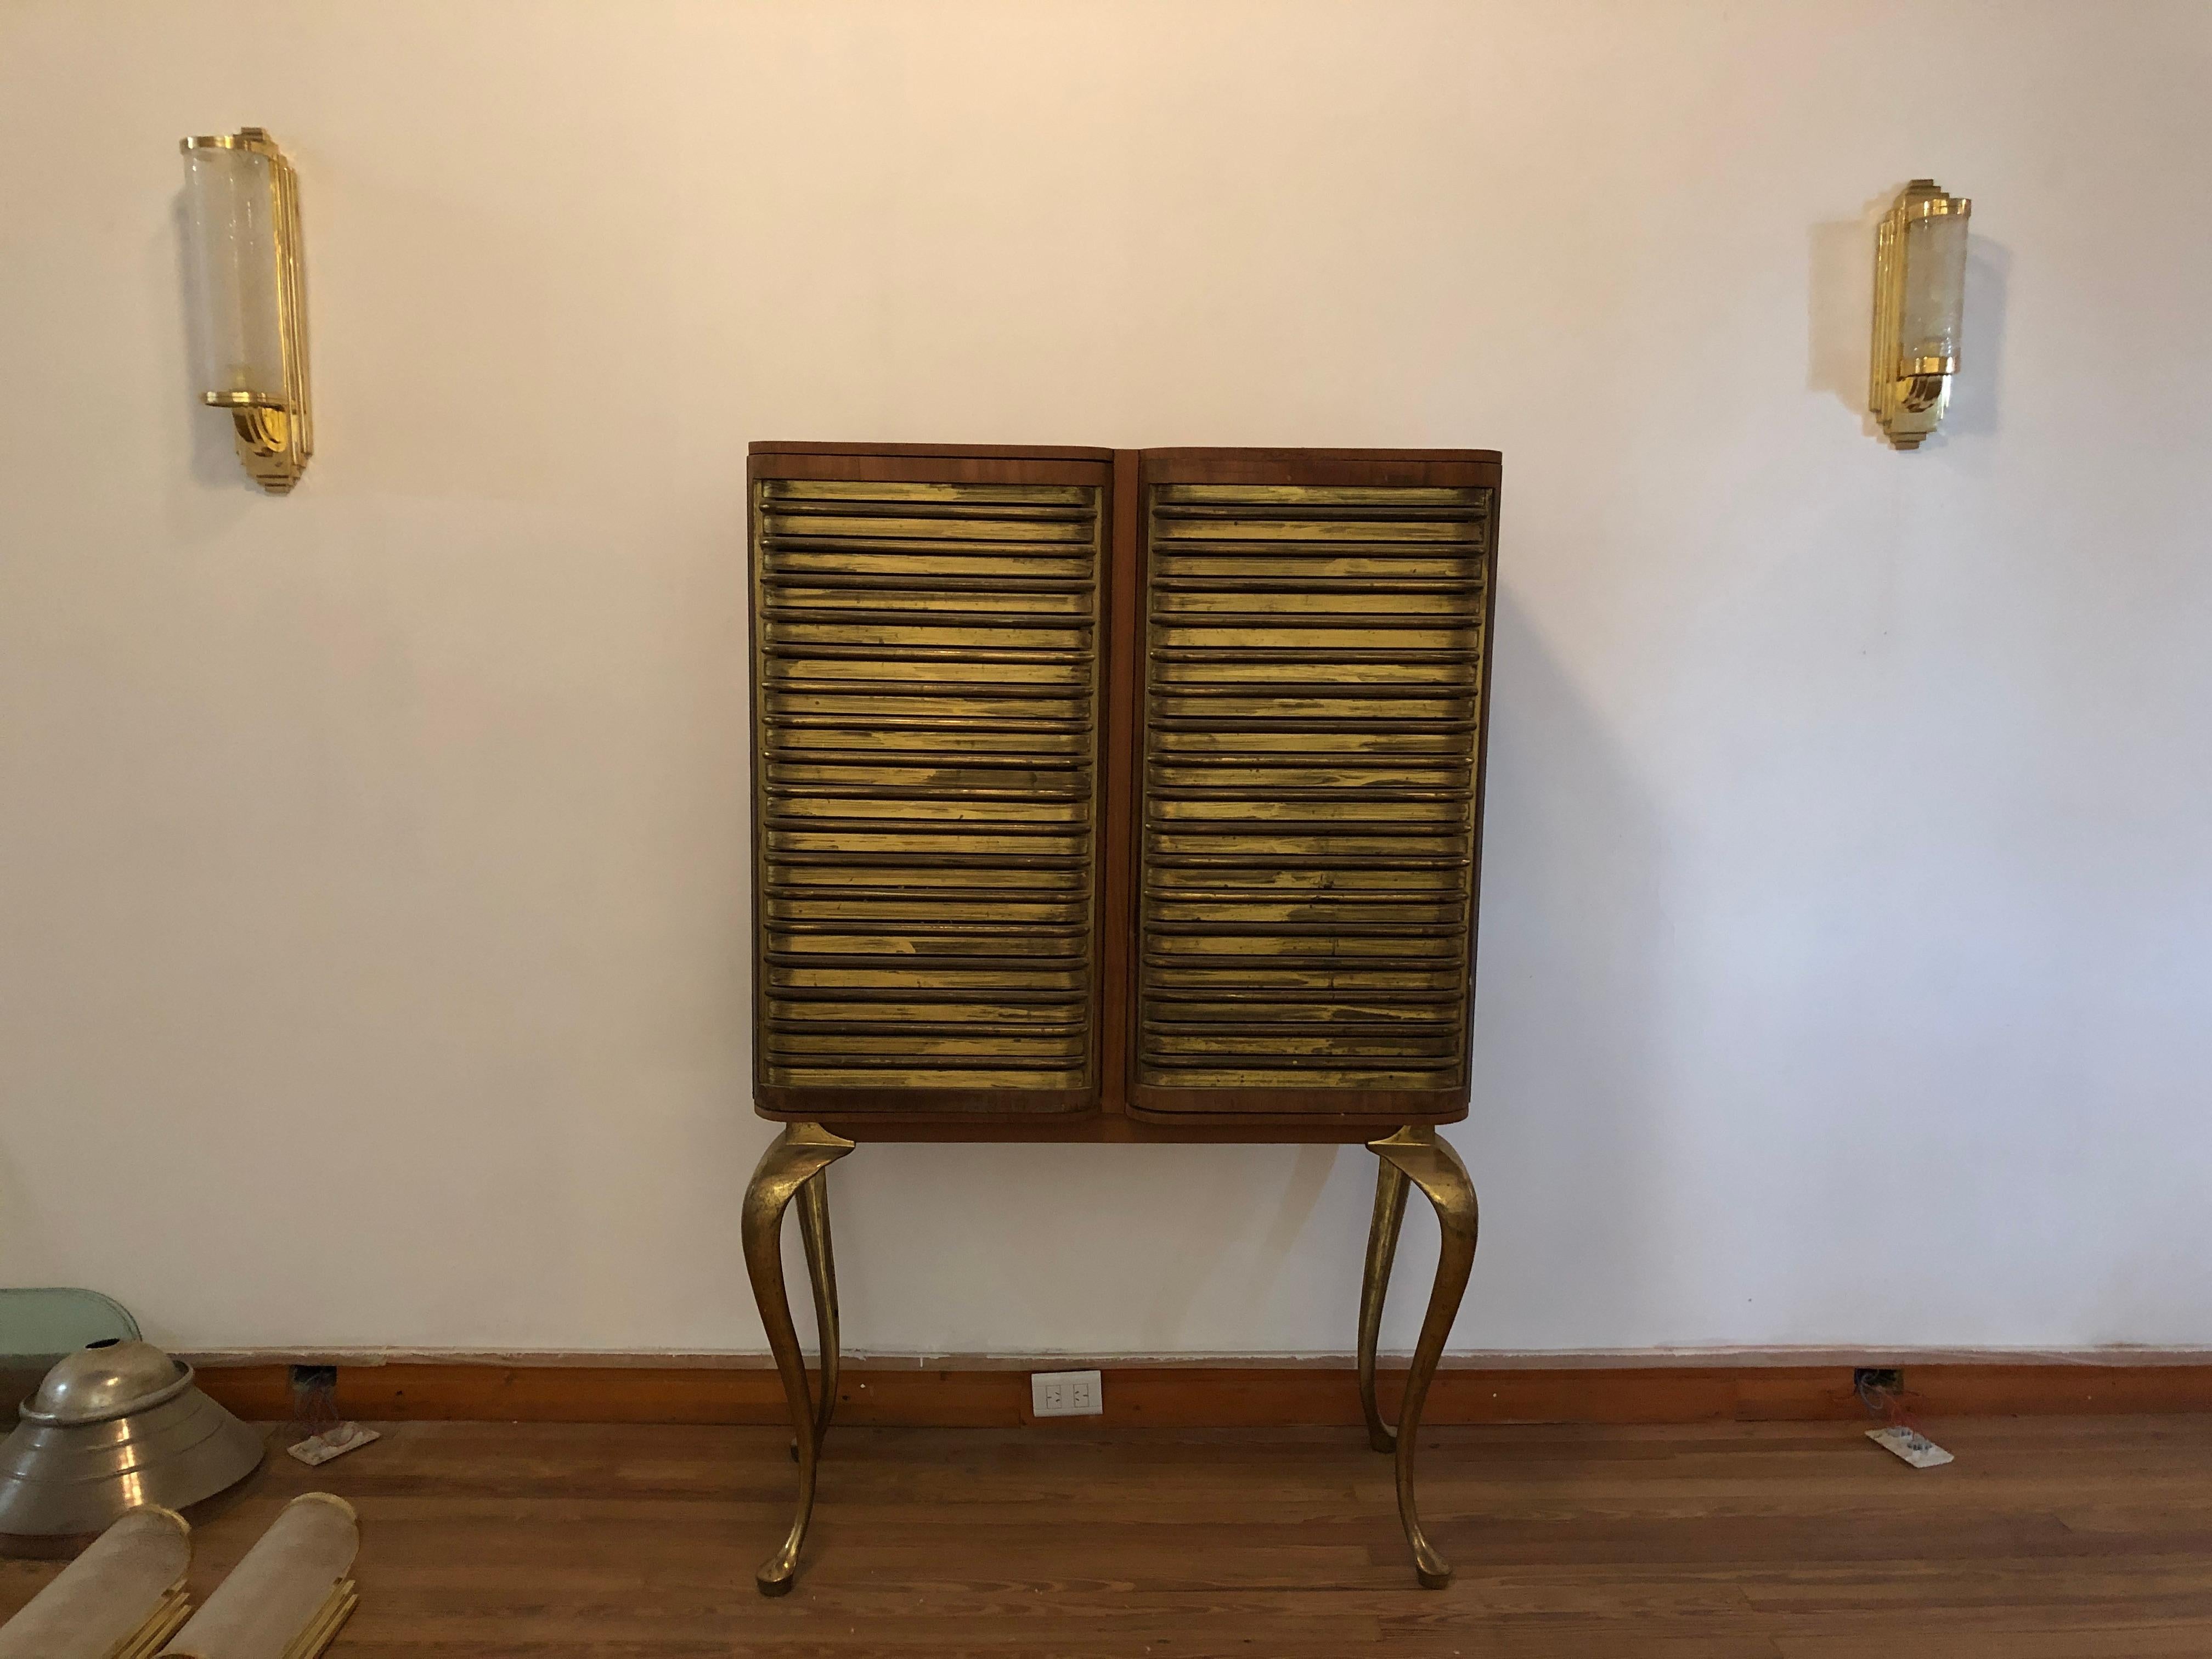 Amaizing Bar 

Material: bronze and wood 
Style: Art Deco
Country: Italy
If you want to live in the golden years, this is the bar that your project needs.
We have specialized in the sale of Art Deco and Art Nouveau and Vintage styles since 1982.If